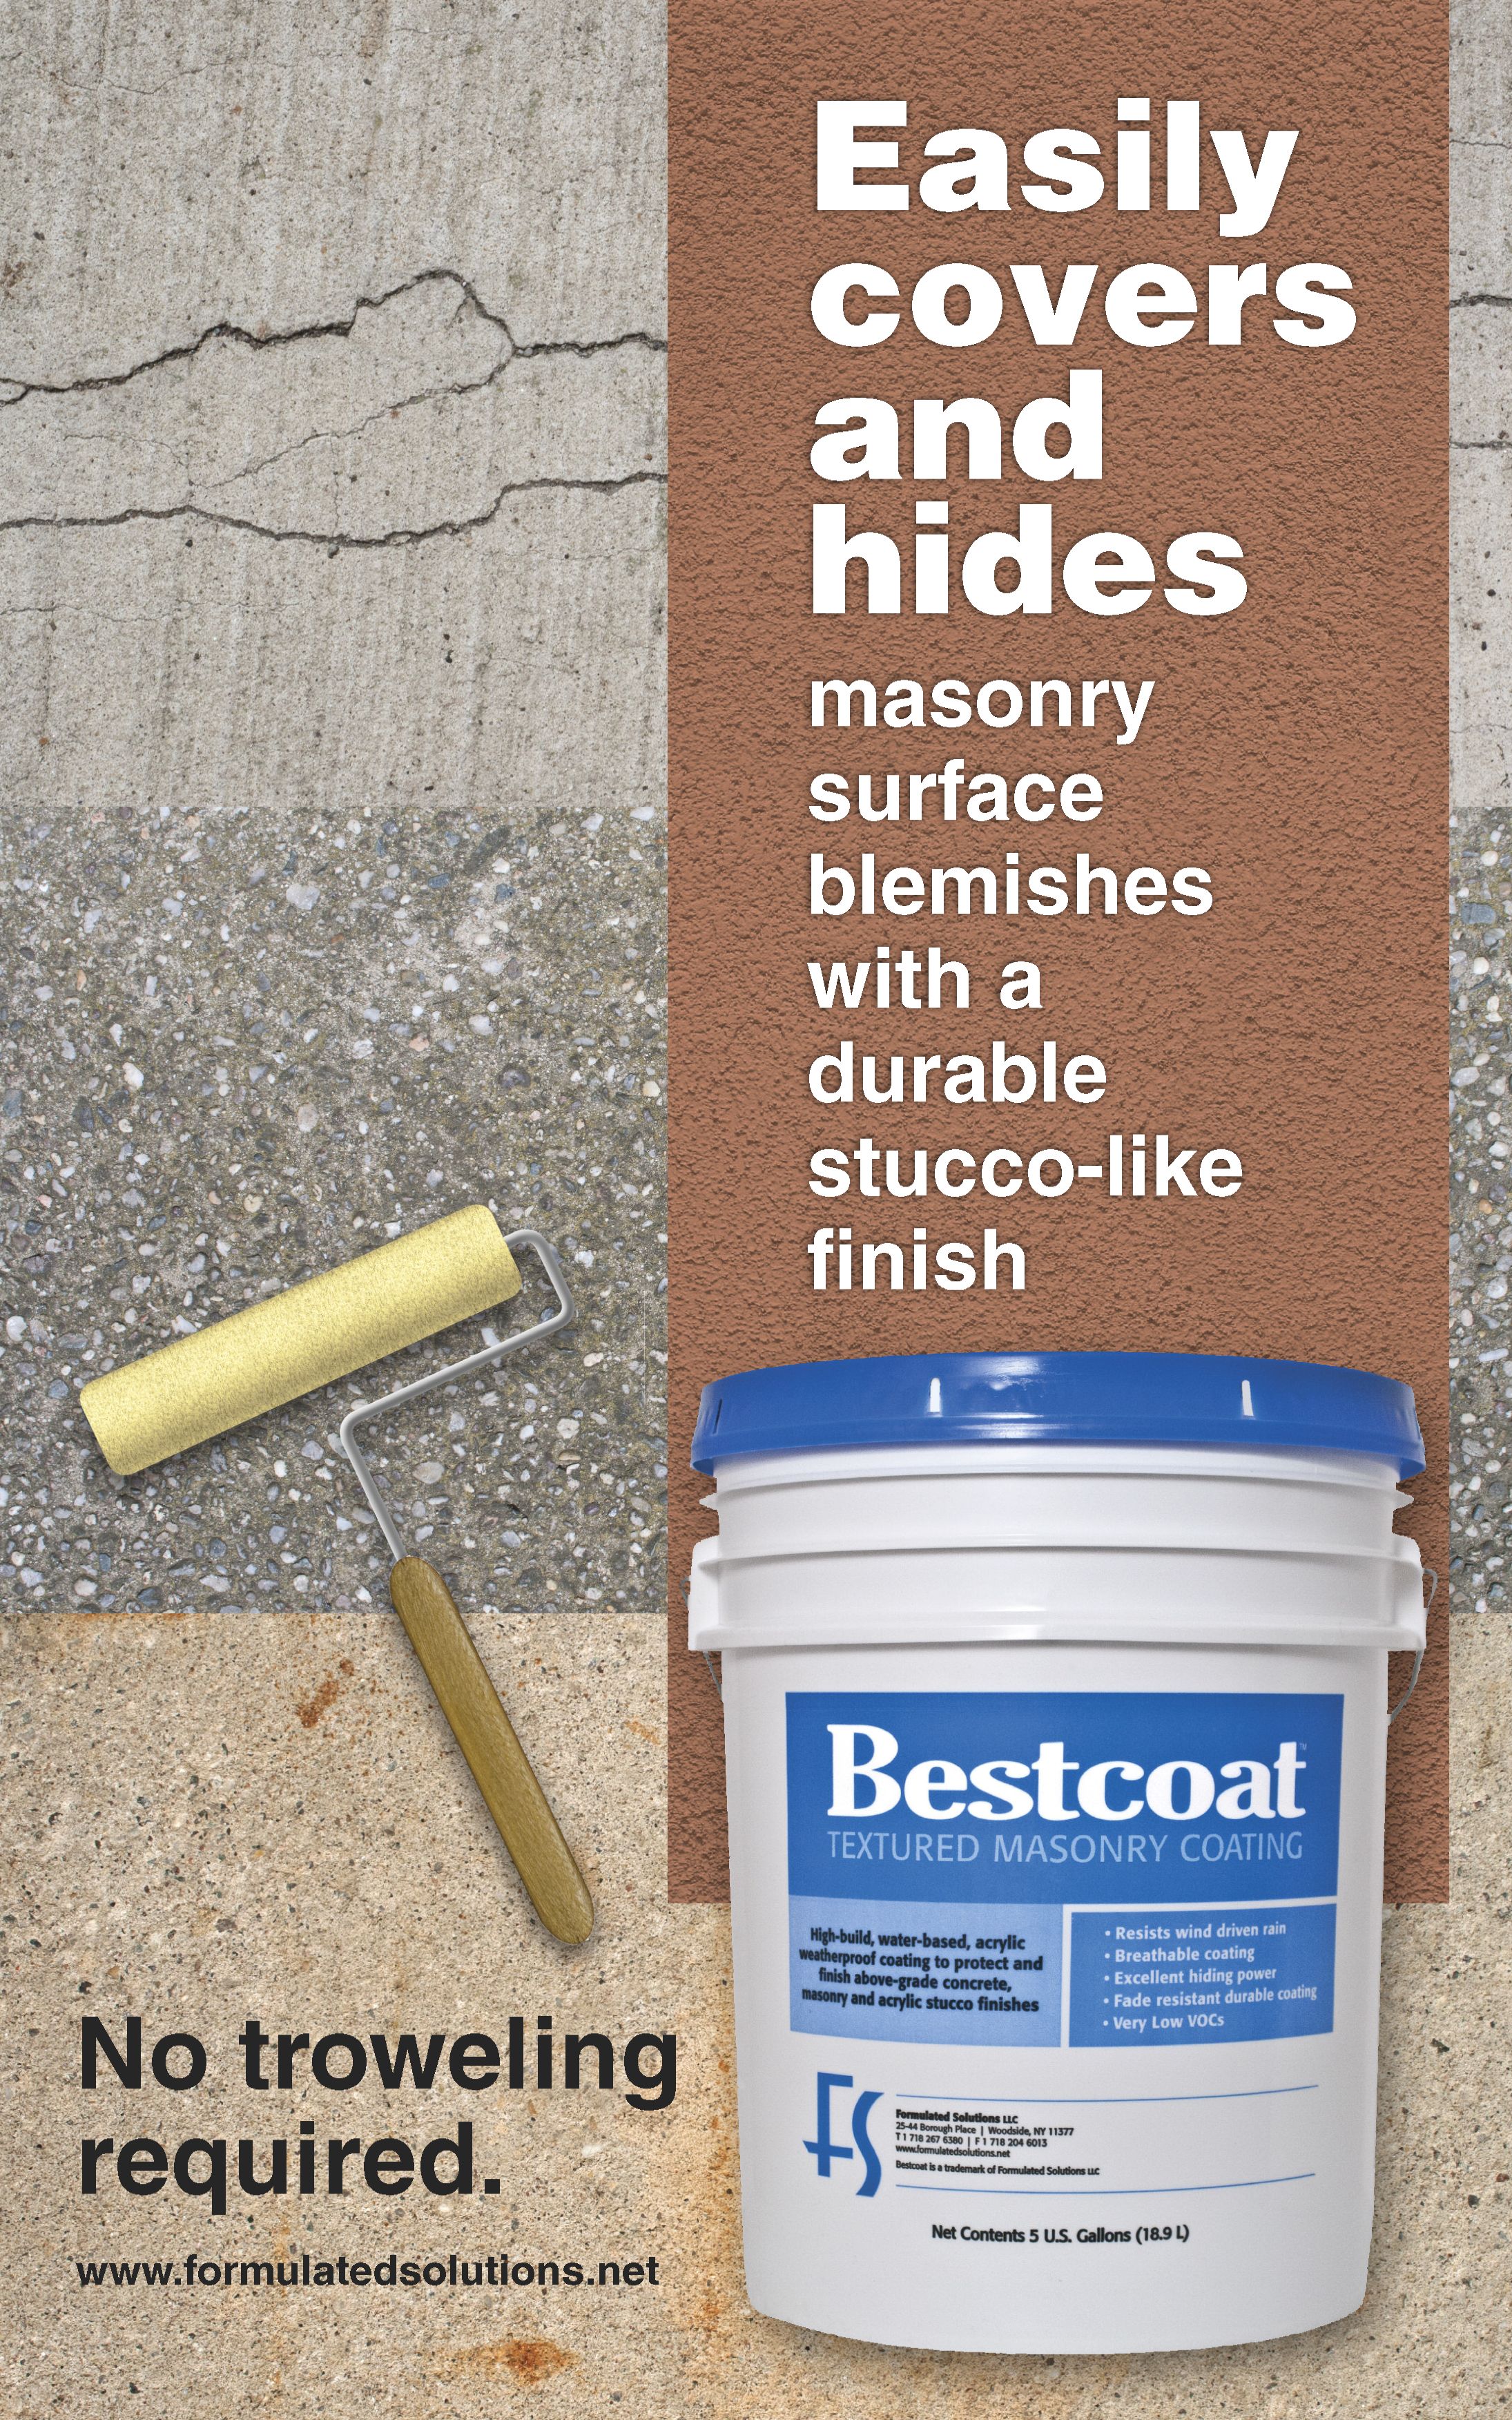 Image of a large point-of-purchase banner representing three different kinds of worn concrete surfaces in need of repair. A large swath of stucco-like coating completely obscures the cracks, coarse aggregate and rust stains. A paint roller and a 5-gallon pail of Bestcoat Textured Masonry Coating are featured in the foreground. The words “No troweling required” appear below the paint roller. The dominant words on the poster are “Easily covers and hides masonry surface blemishes with a 
                                        durable stucco-like finish”.